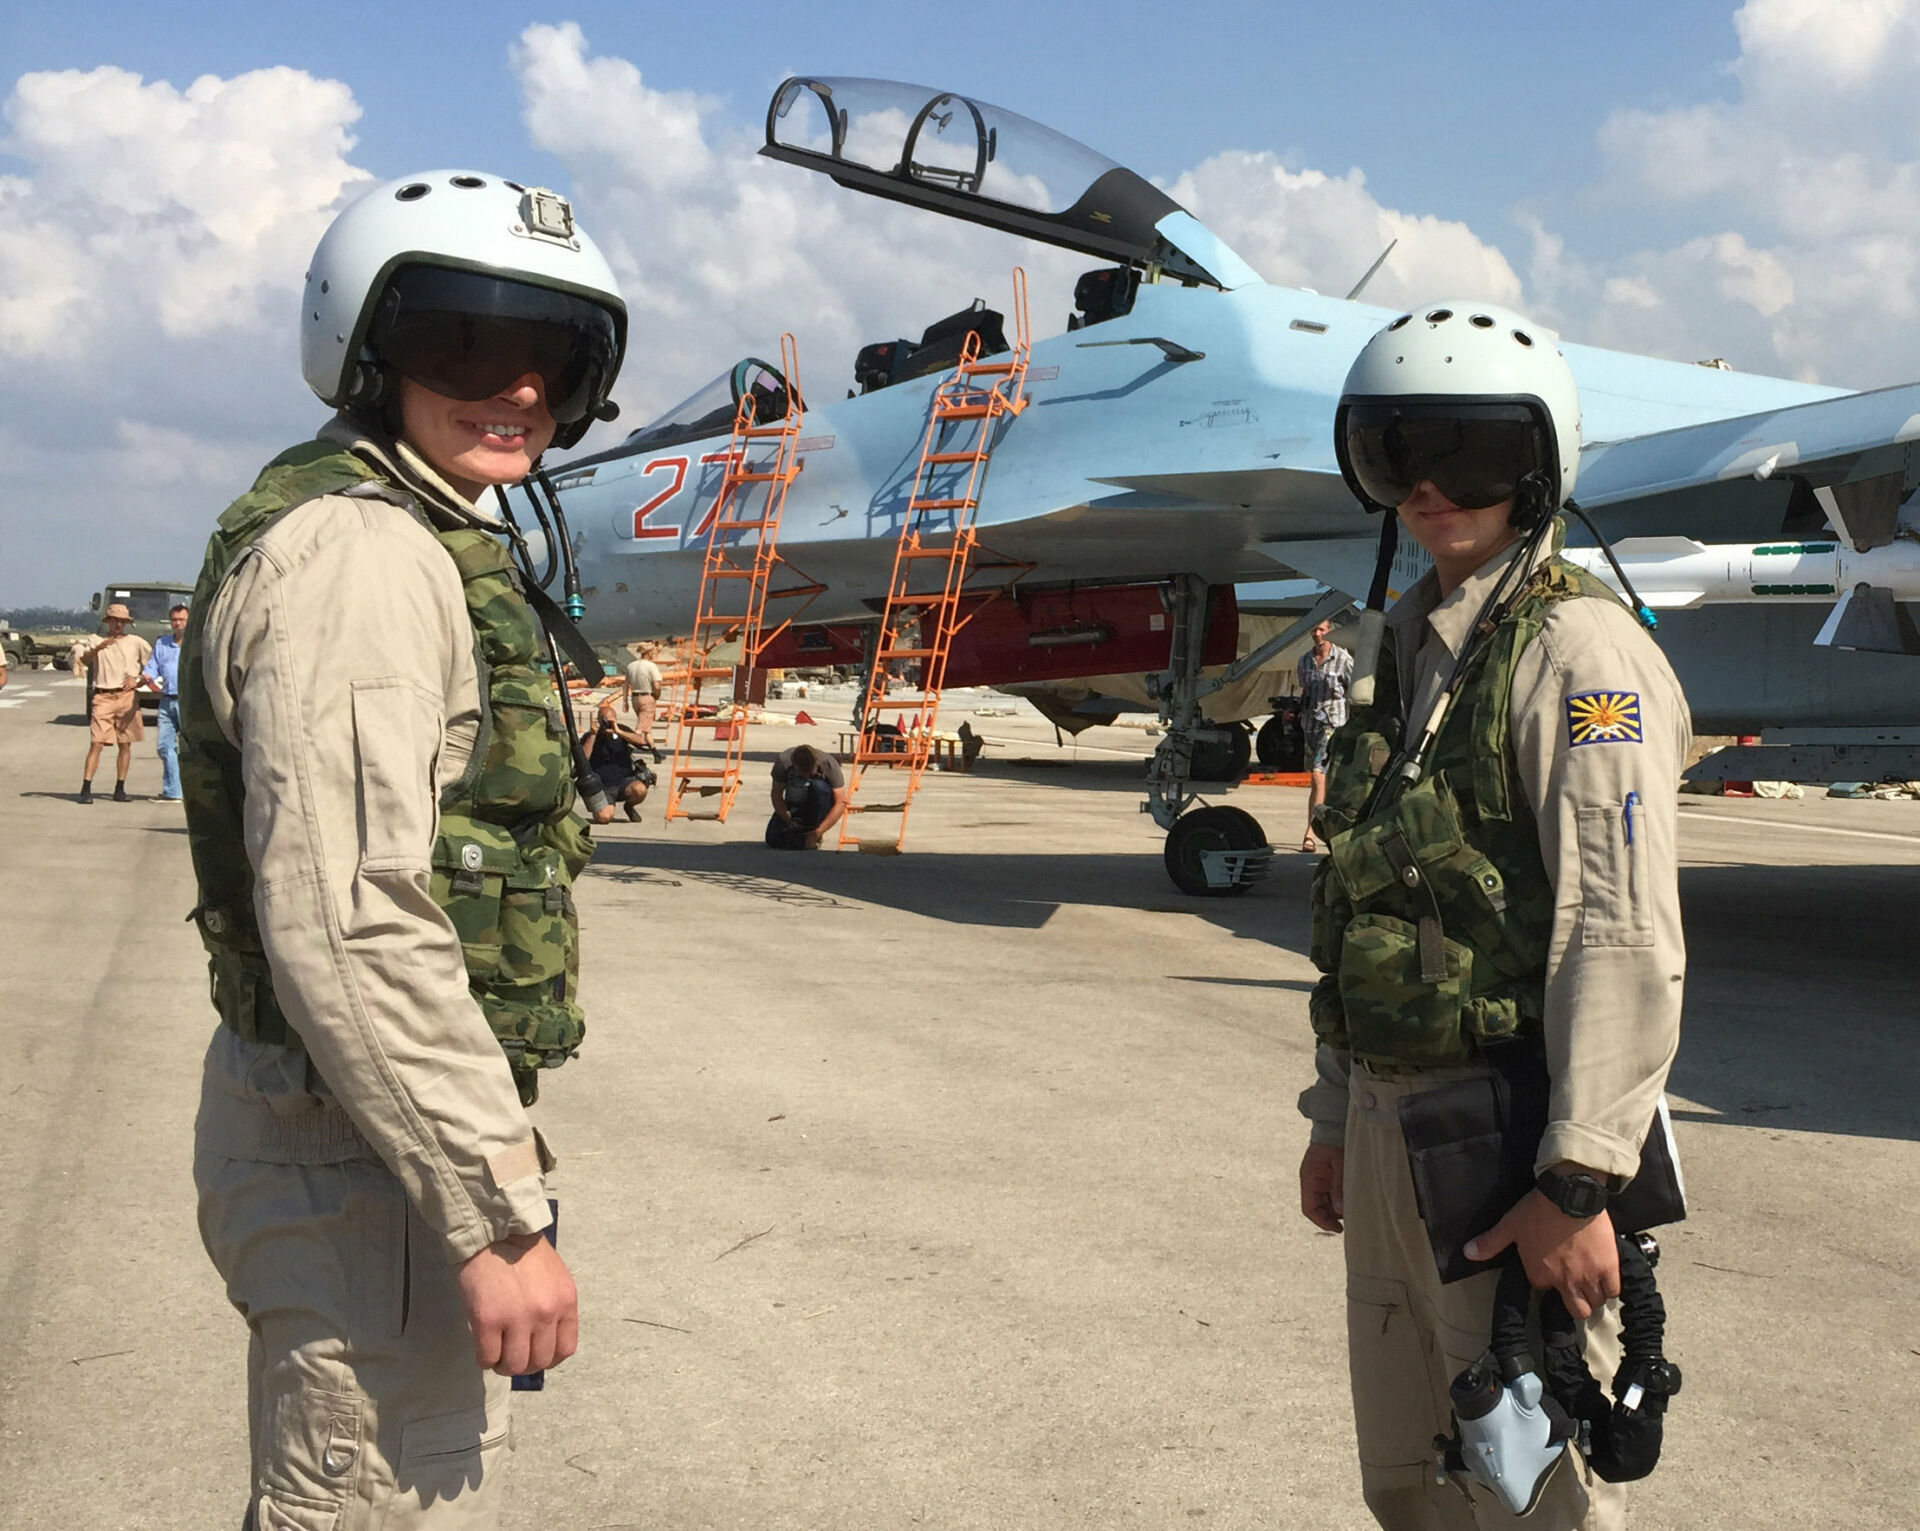 Russian tactical group seen at Hmeymim aerodrome in Syria